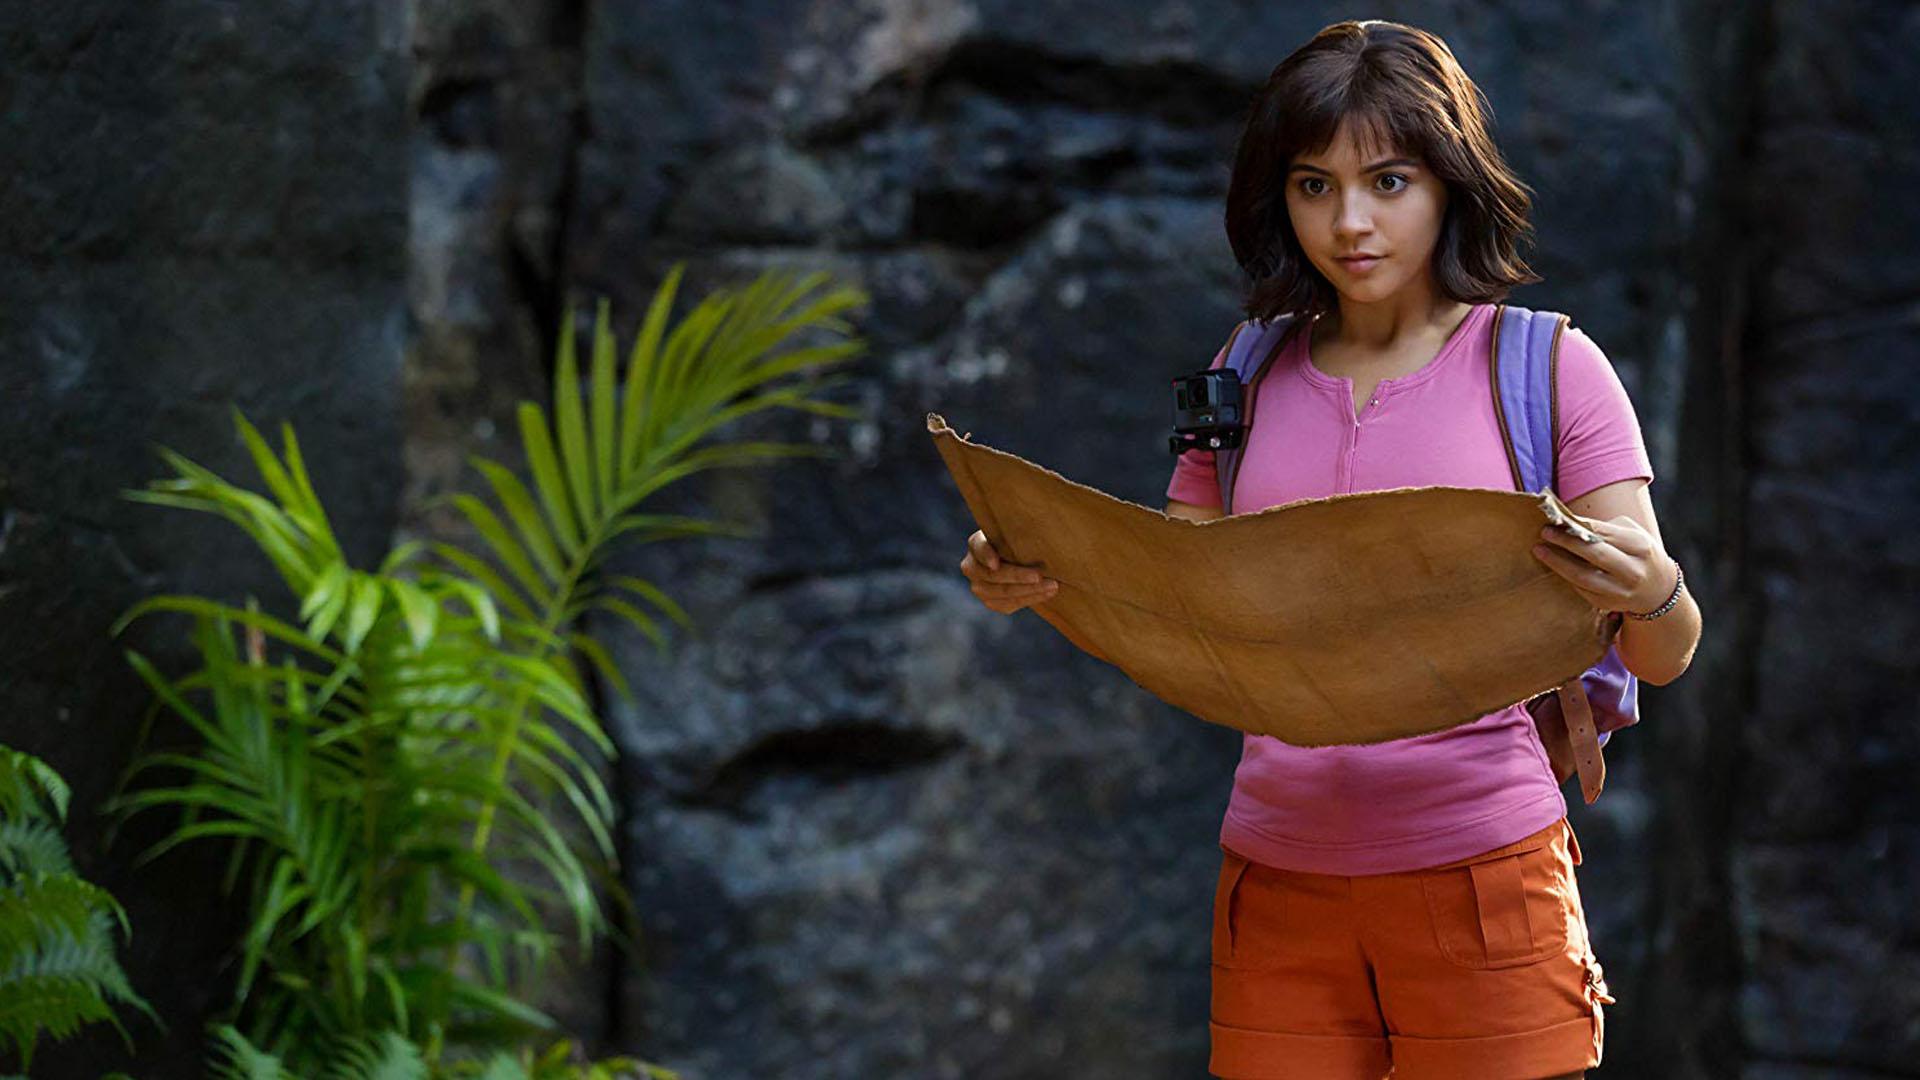 Dora” The Explorer Journeys To The Big Screen In “The Lost City Of